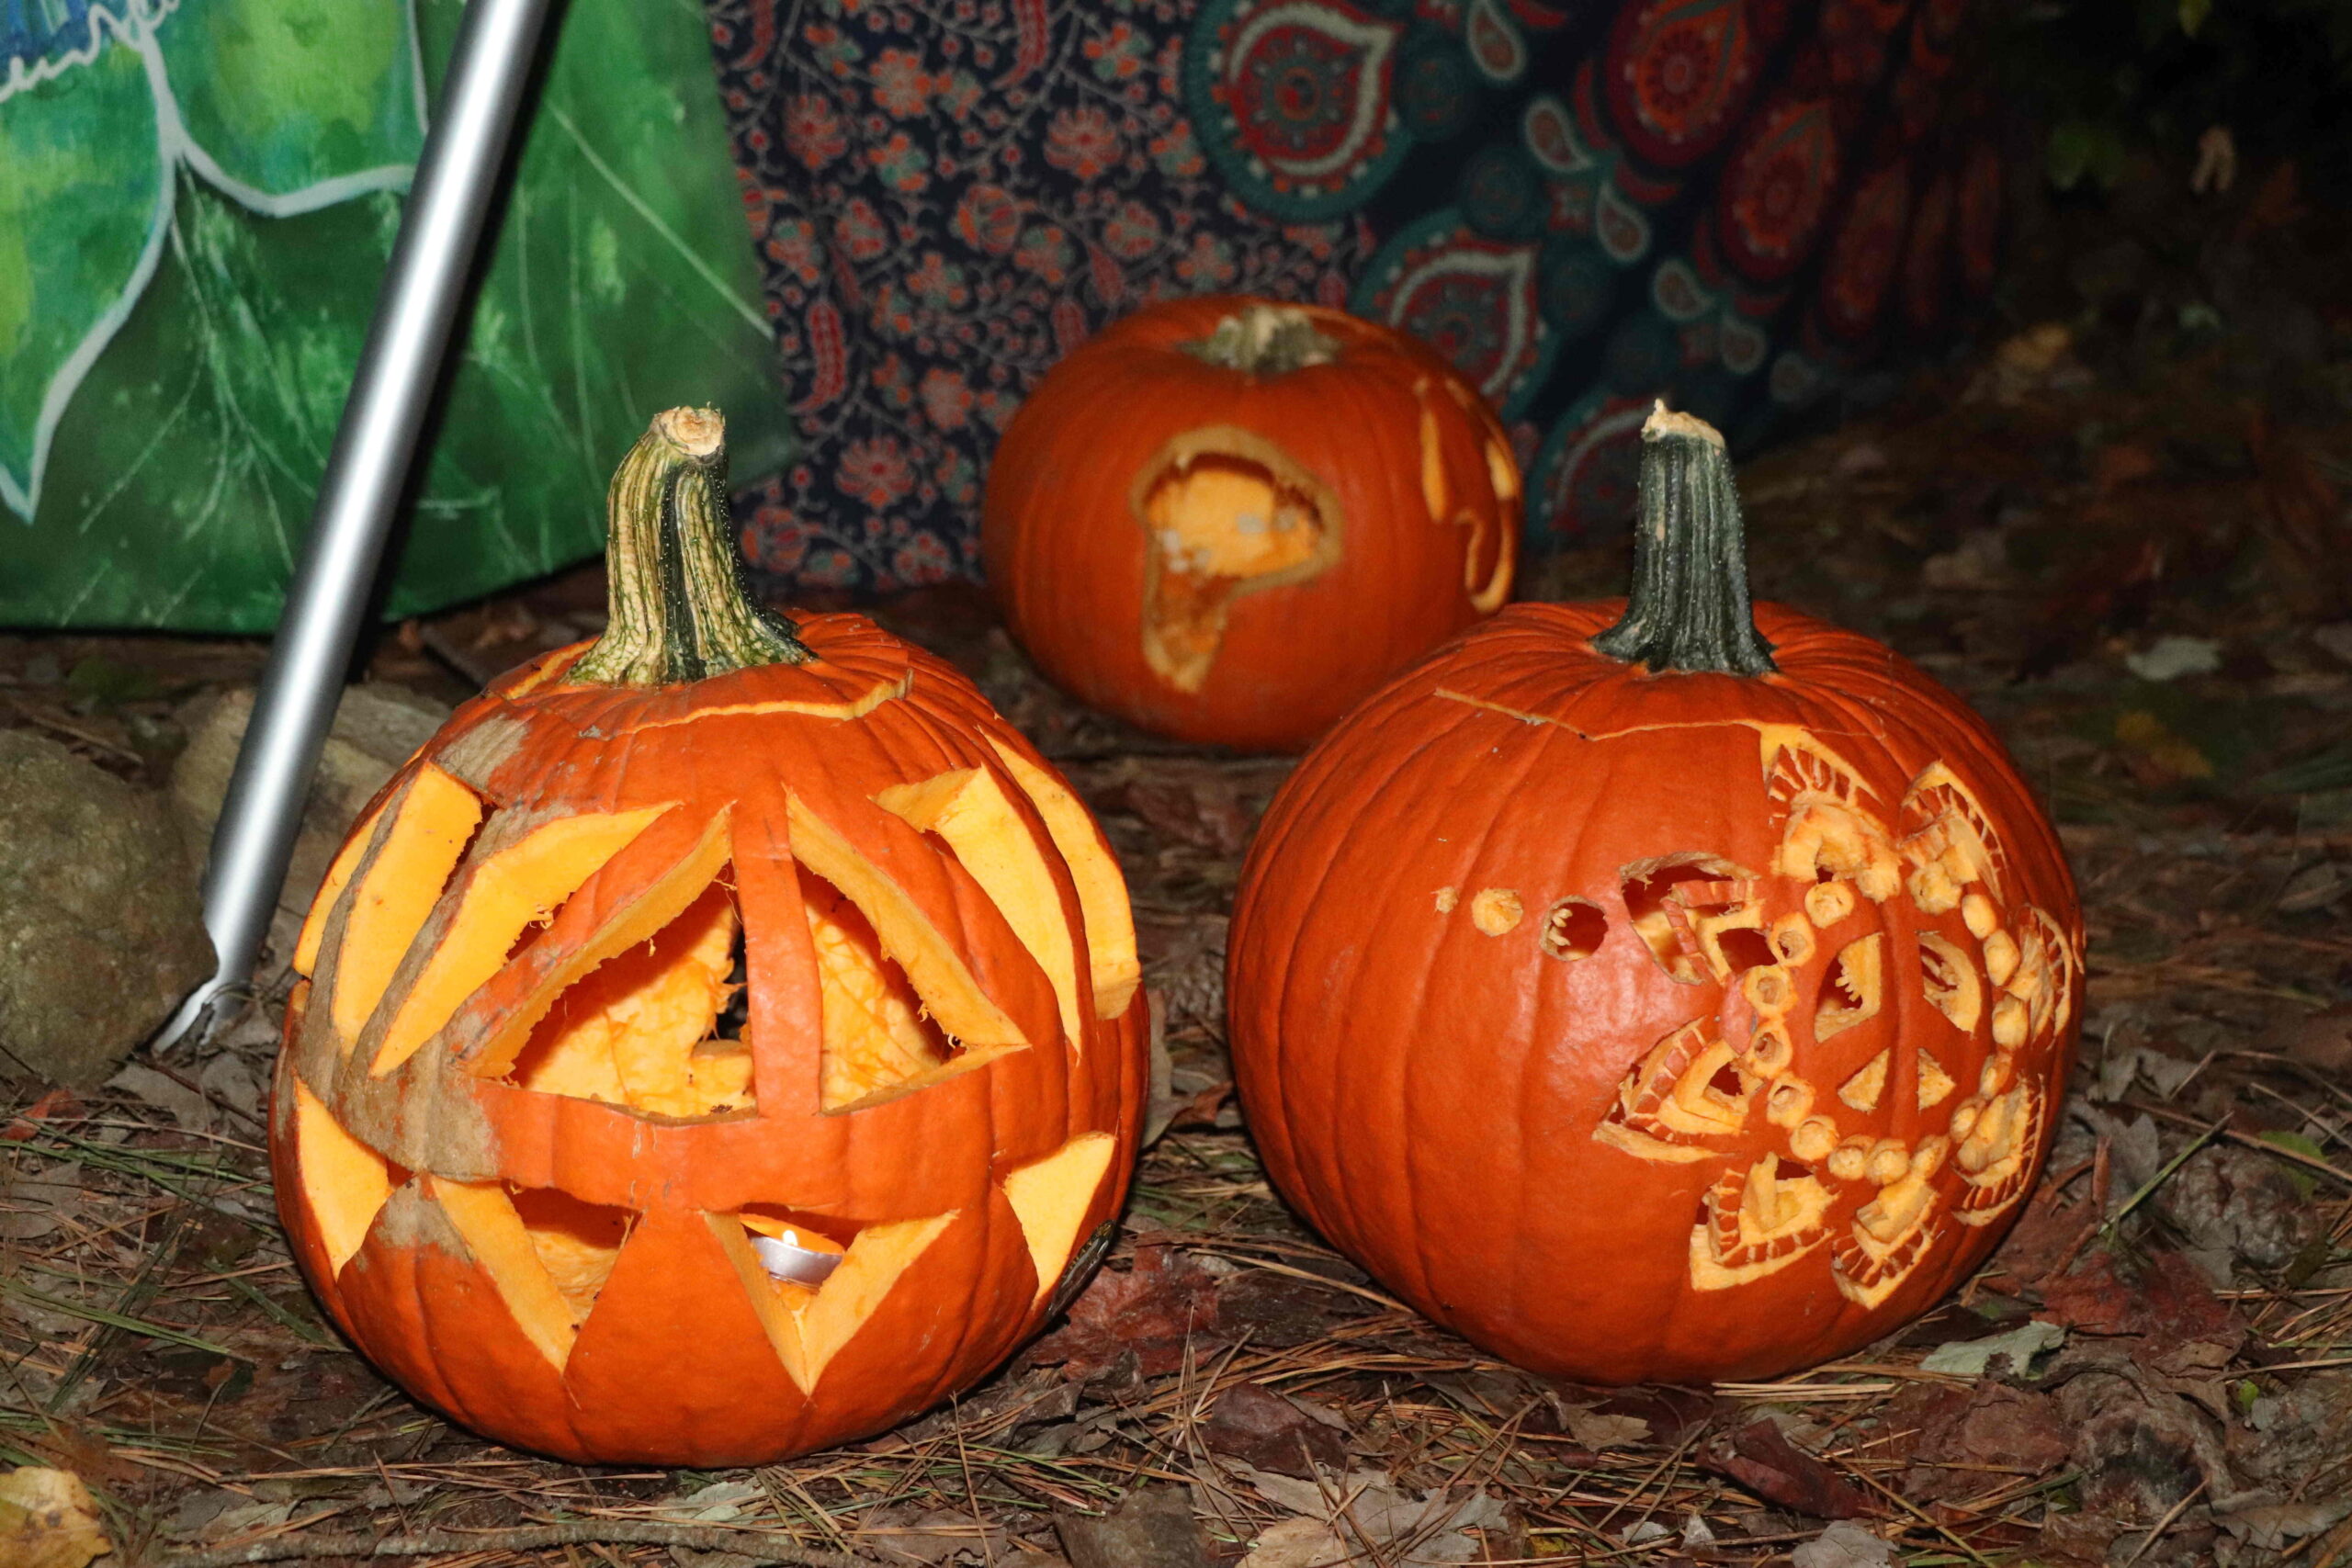 Decorated pumkins outside of our camp site.